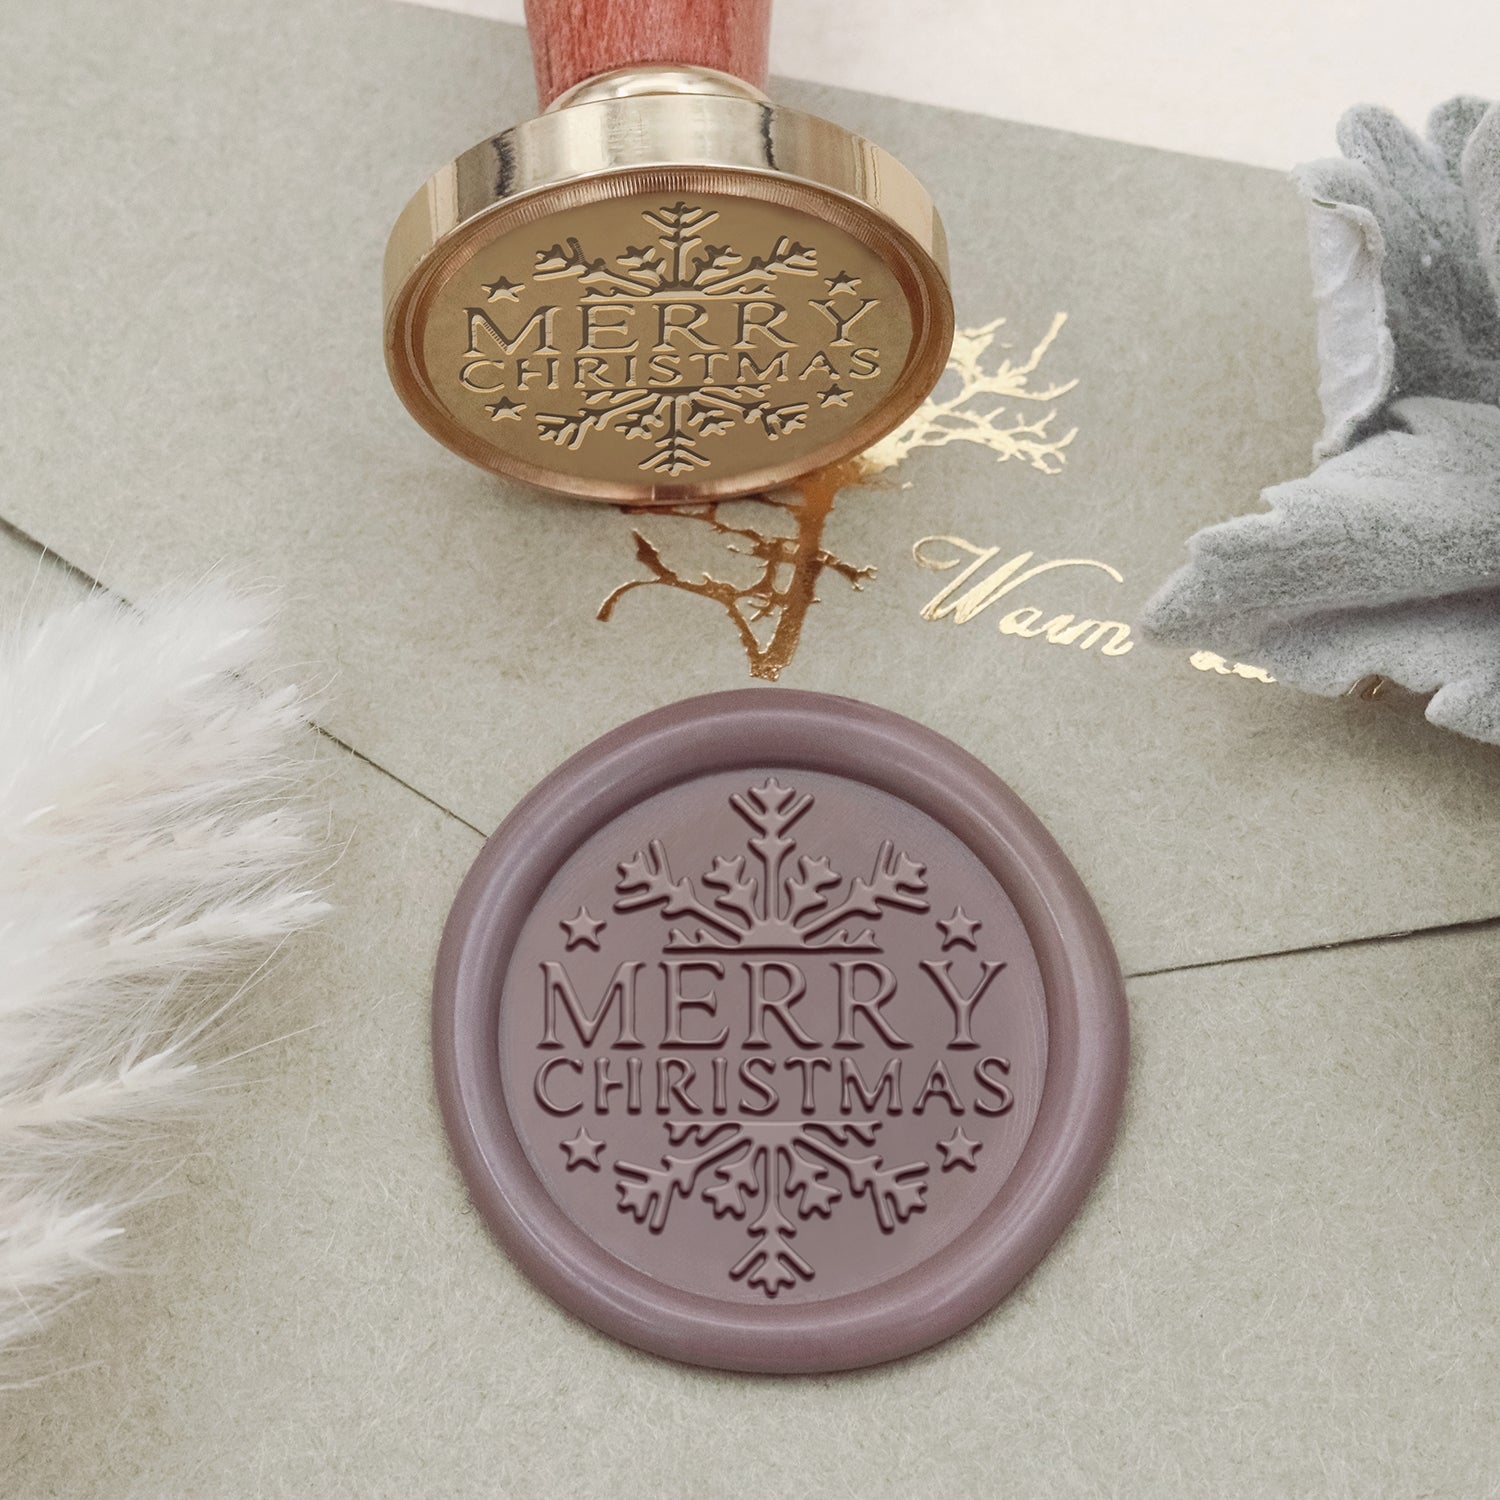 Merry Christmas wax seal stamp, wax seal kit or stamp head